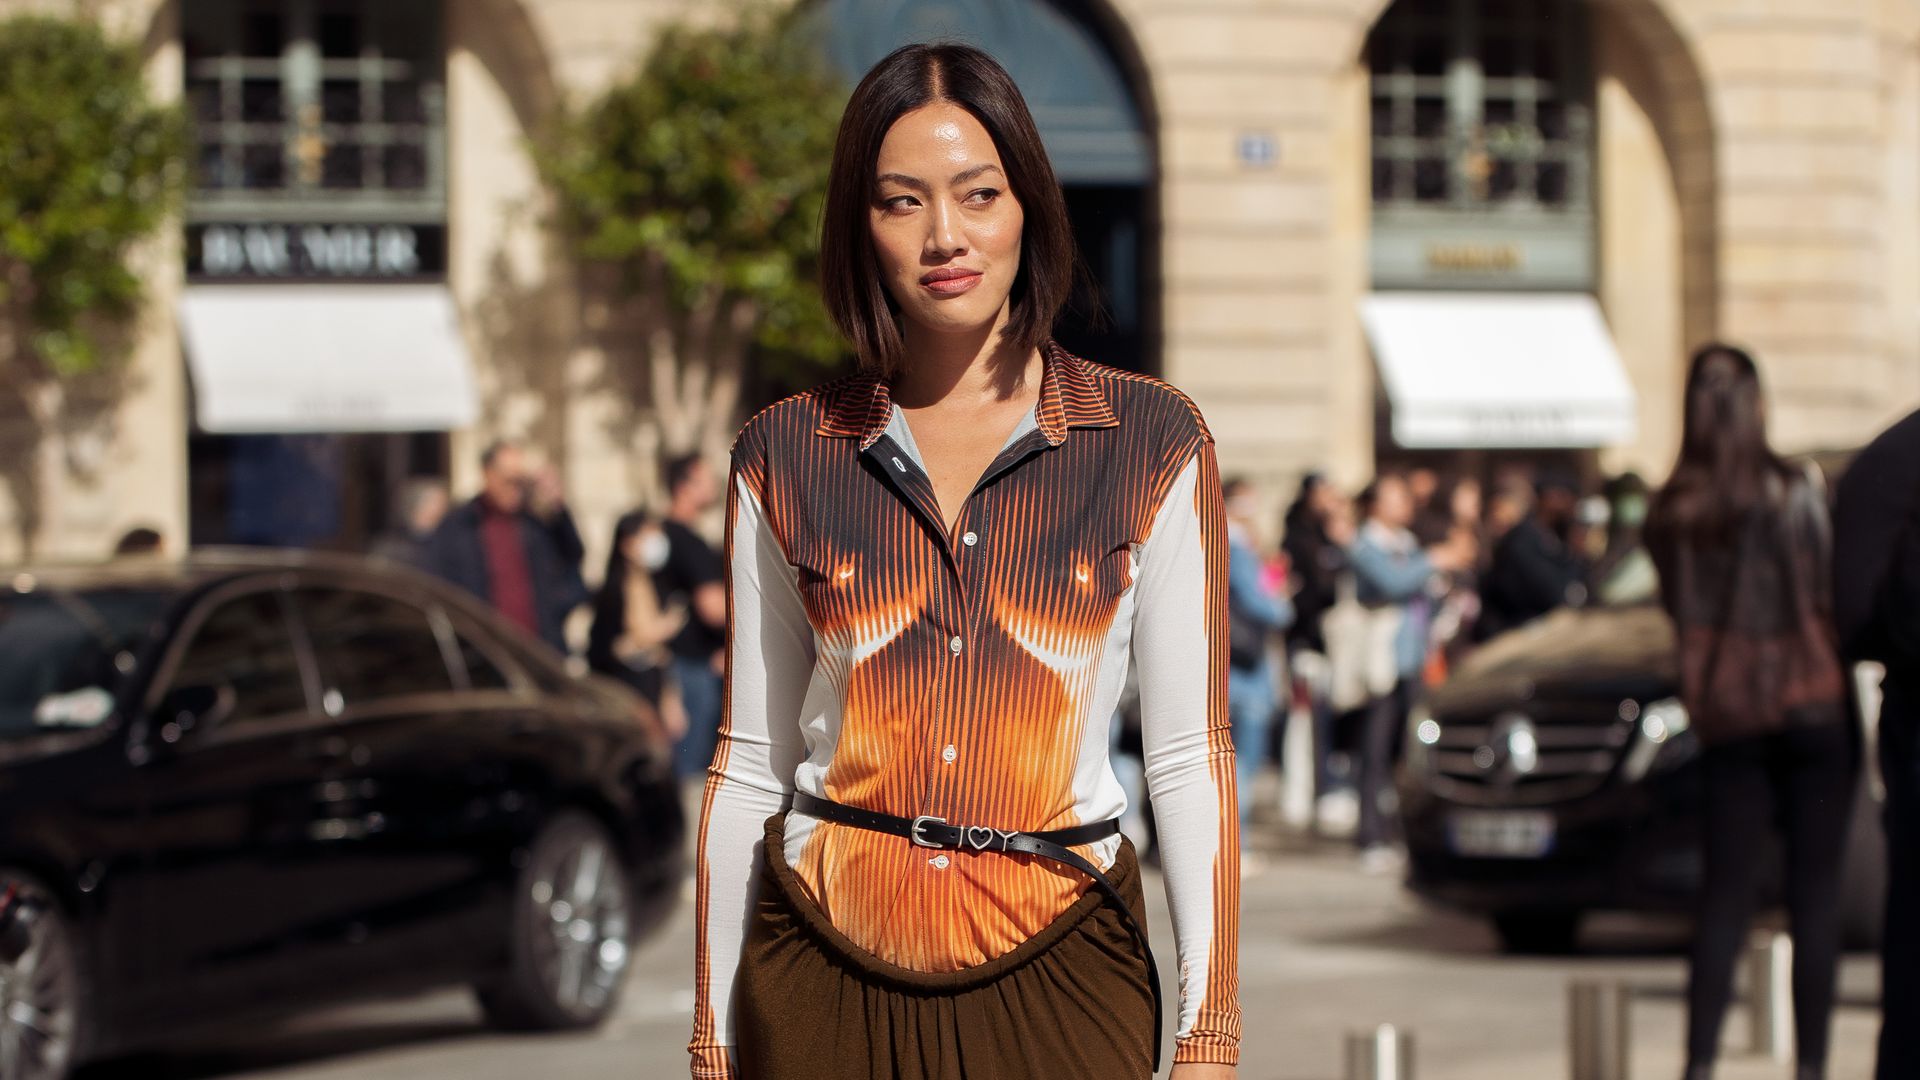 PARIS, FRANCE - SEPTEMBER 29: Tiffany Hsu wearing a brown, white, orange top and long brown maxi skirt outside the Chloe show during Paris Fashion Week S/S 2023 on September 29, 2022 in Paris, France. (Photo by Raimonda Kulikauskiene/Getty Images)